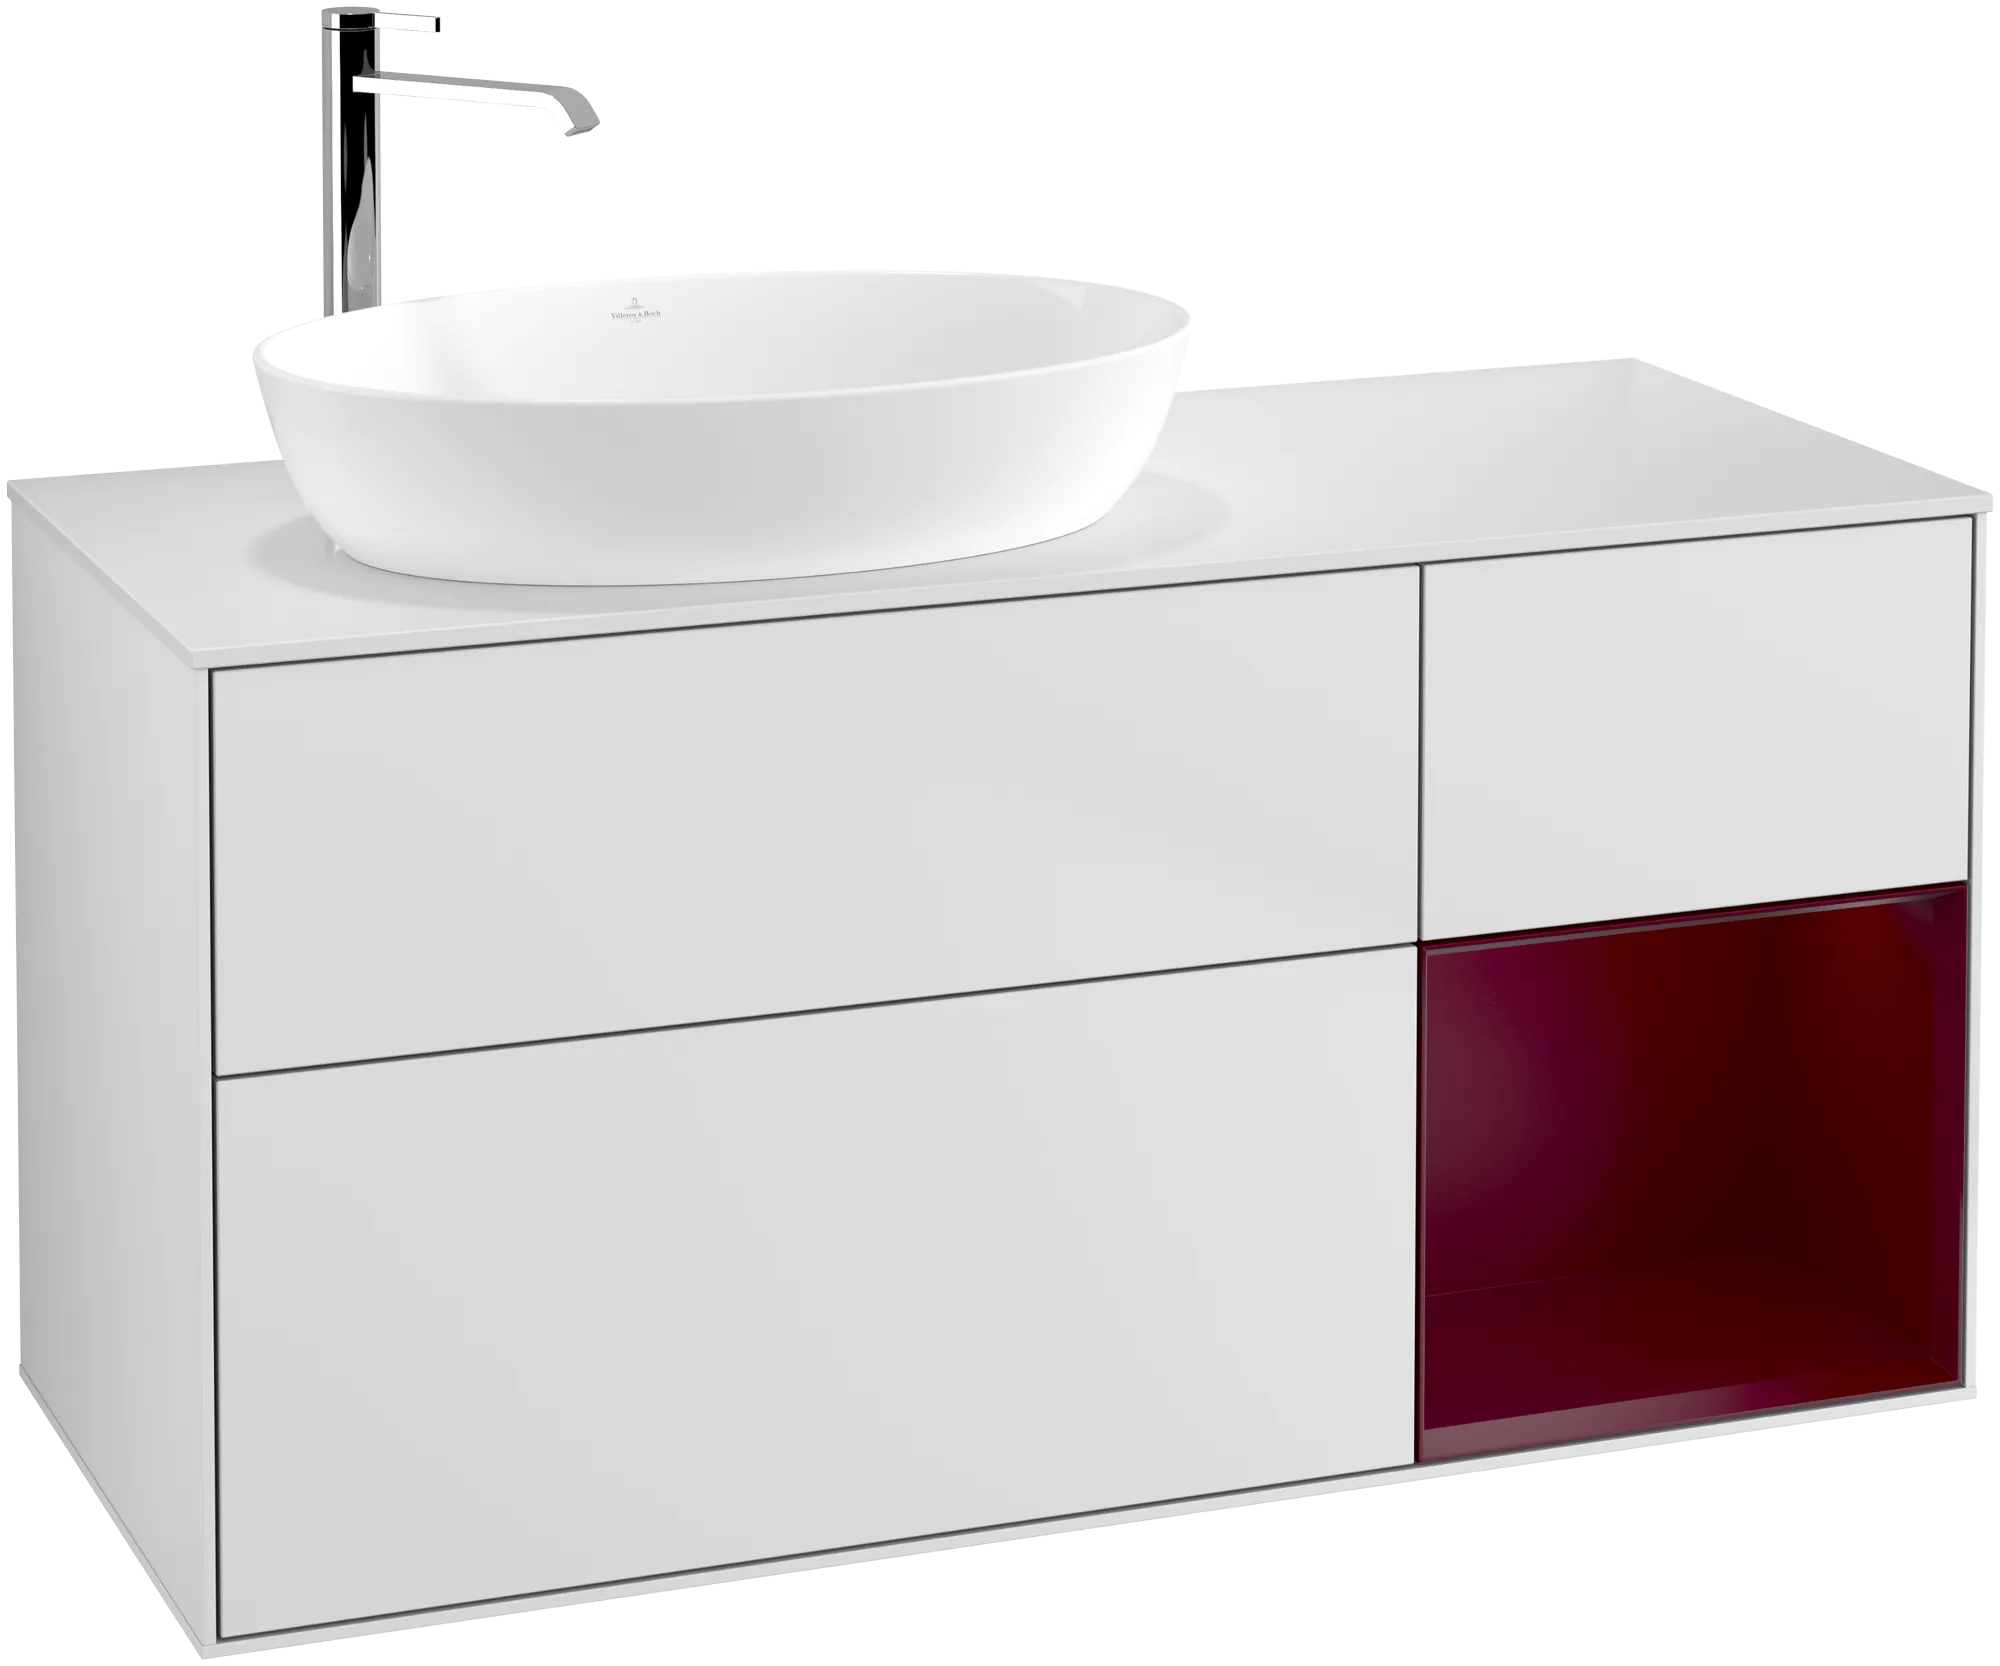 Picture of VILLEROY BOCH Finion Vanity unit, with lighting, 3 pull-out compartments, 1200 x 603 x 501 mm, White Matt Lacquer / Peony Matt Lacquer / Glass White Matt #G931HBMT